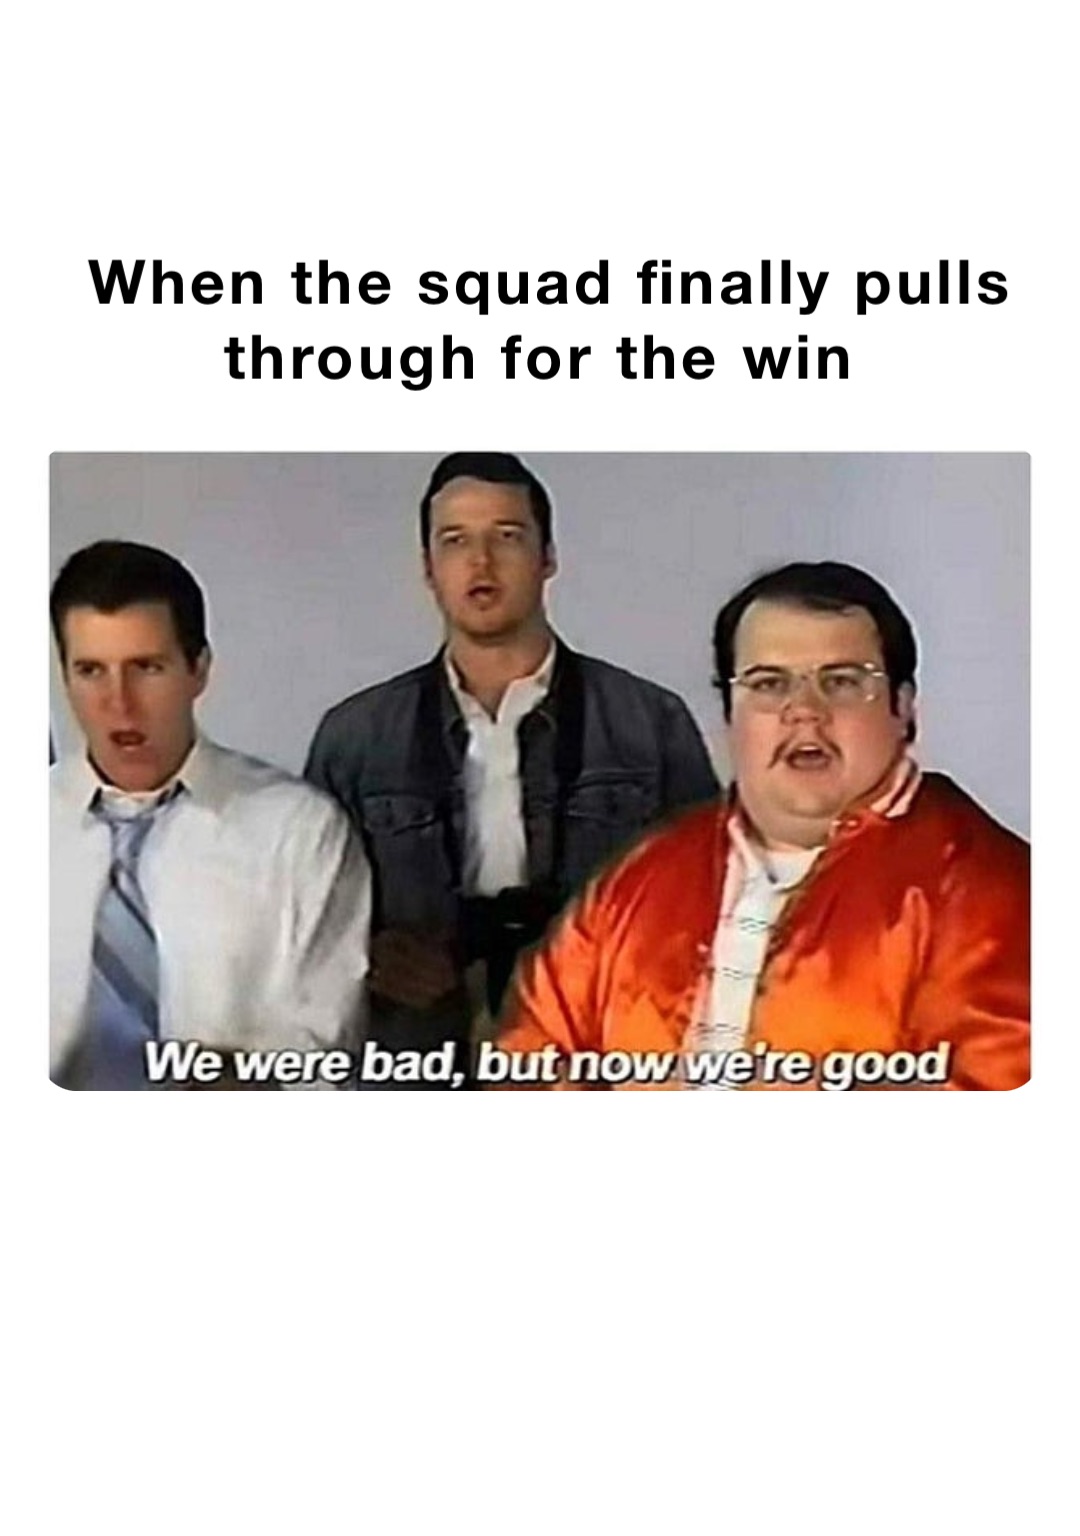 When the squad finally pulls through for the win